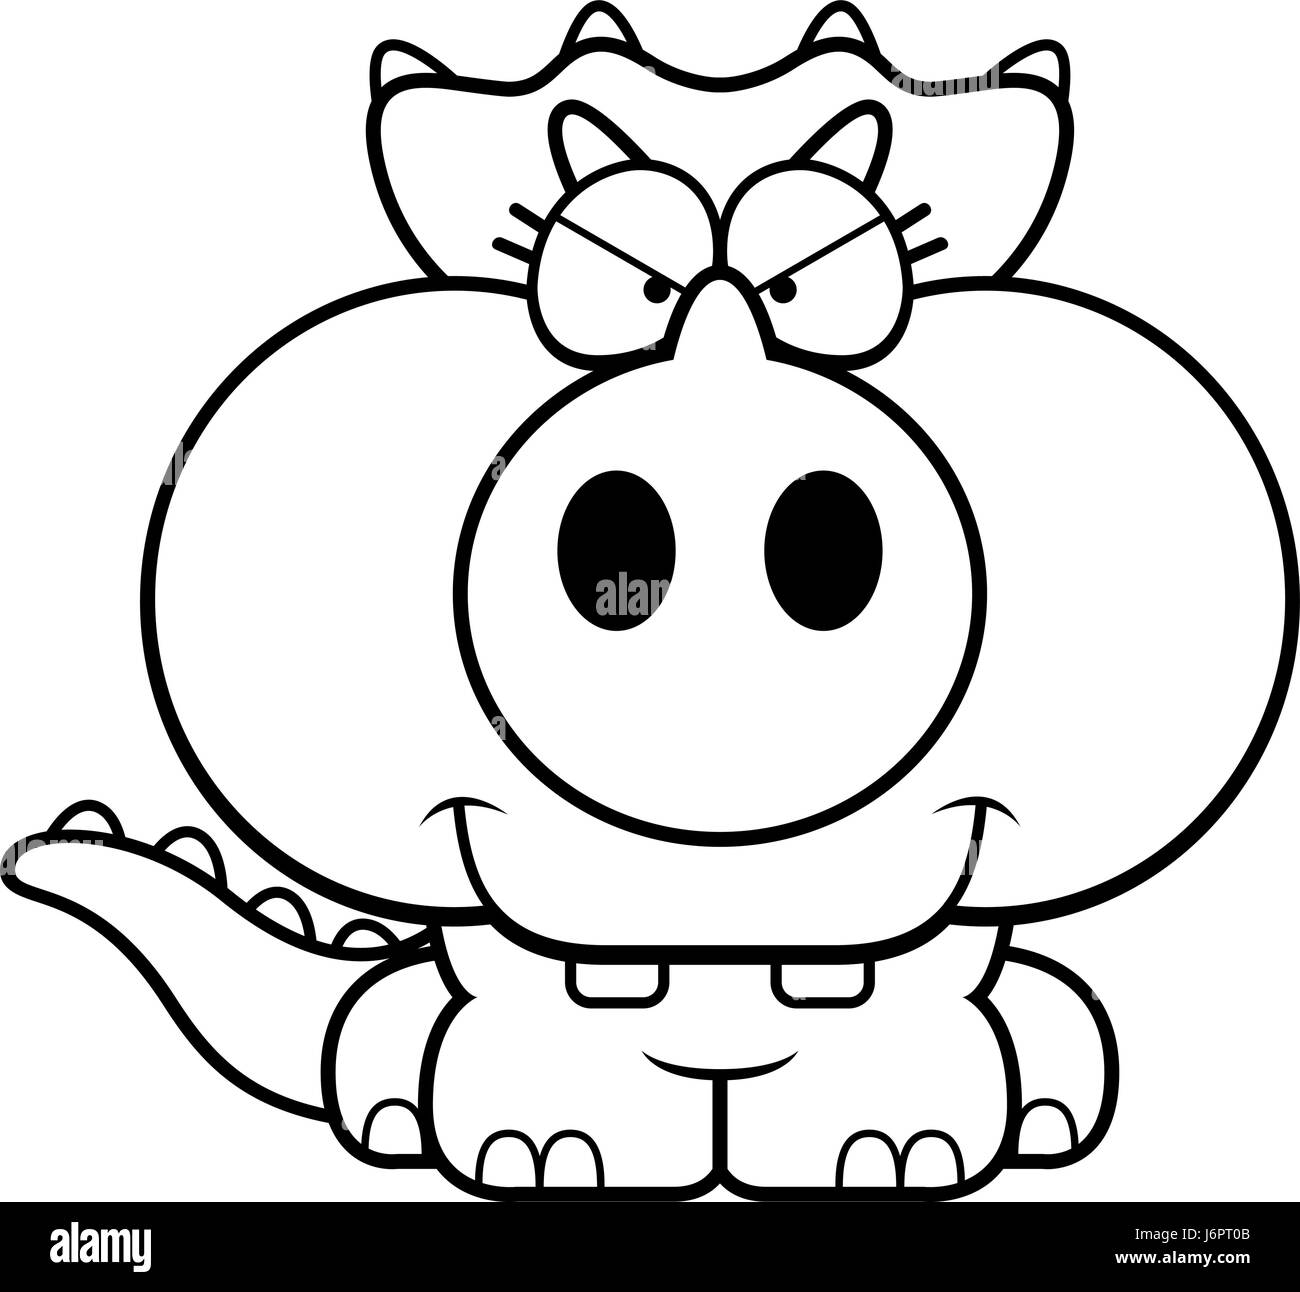 A cartoon illustration of a little Triceratops dinosaur with a devious expression. Stock Vector